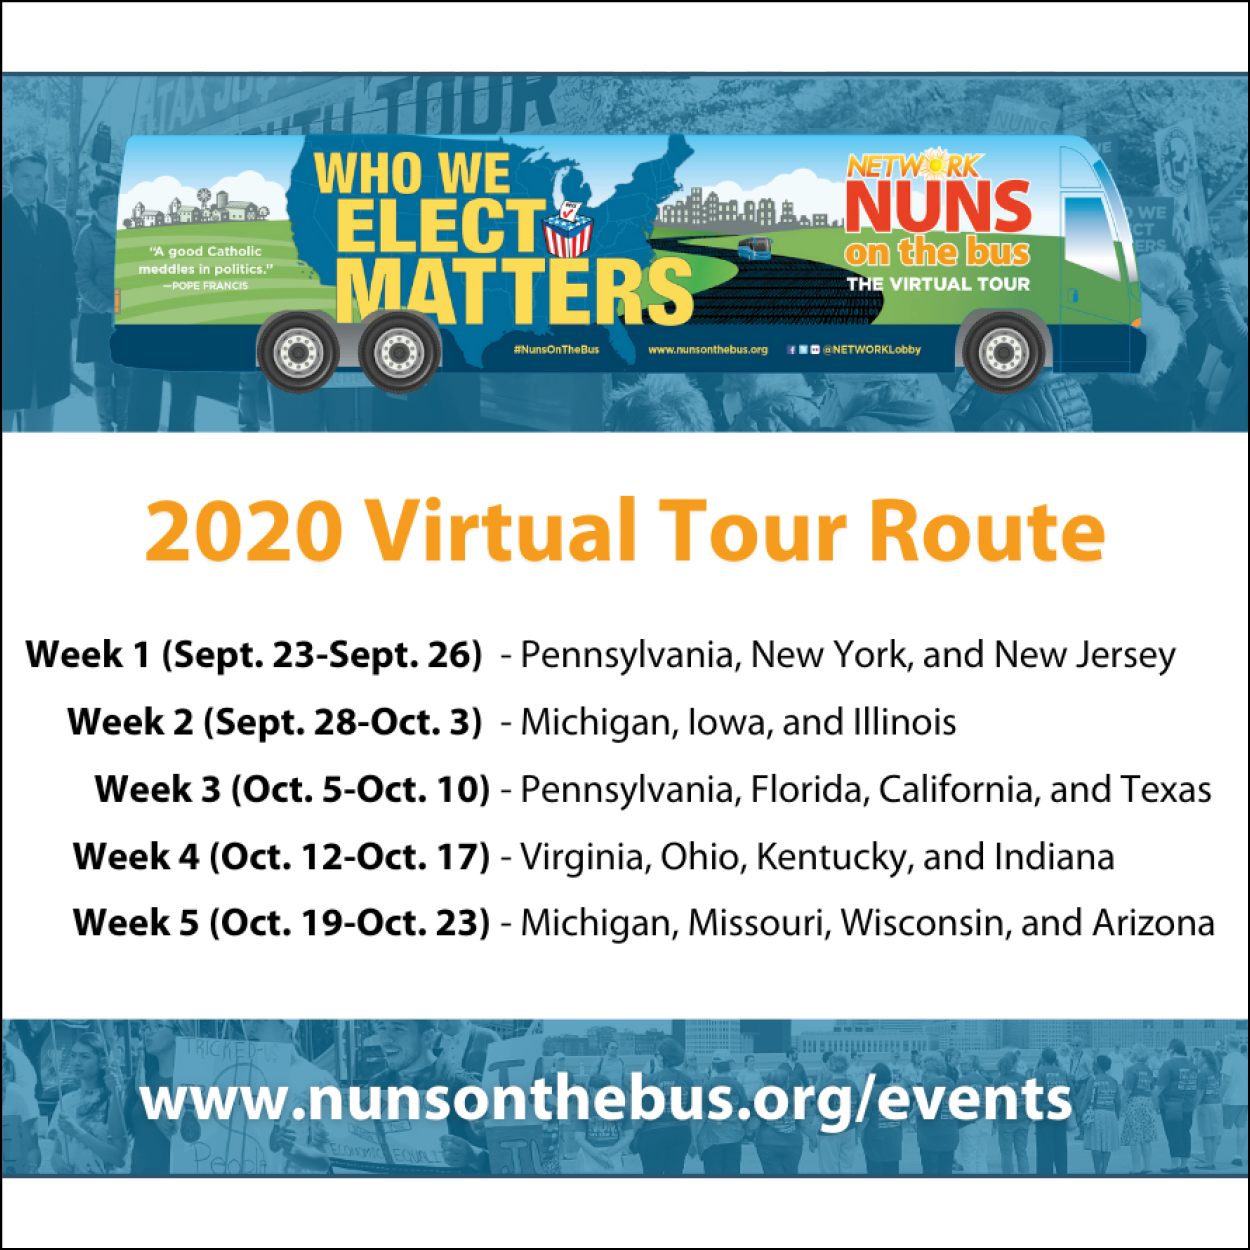 Ten Giving Voice Sisters join Nuns on the Bus Virtual Tour this fall